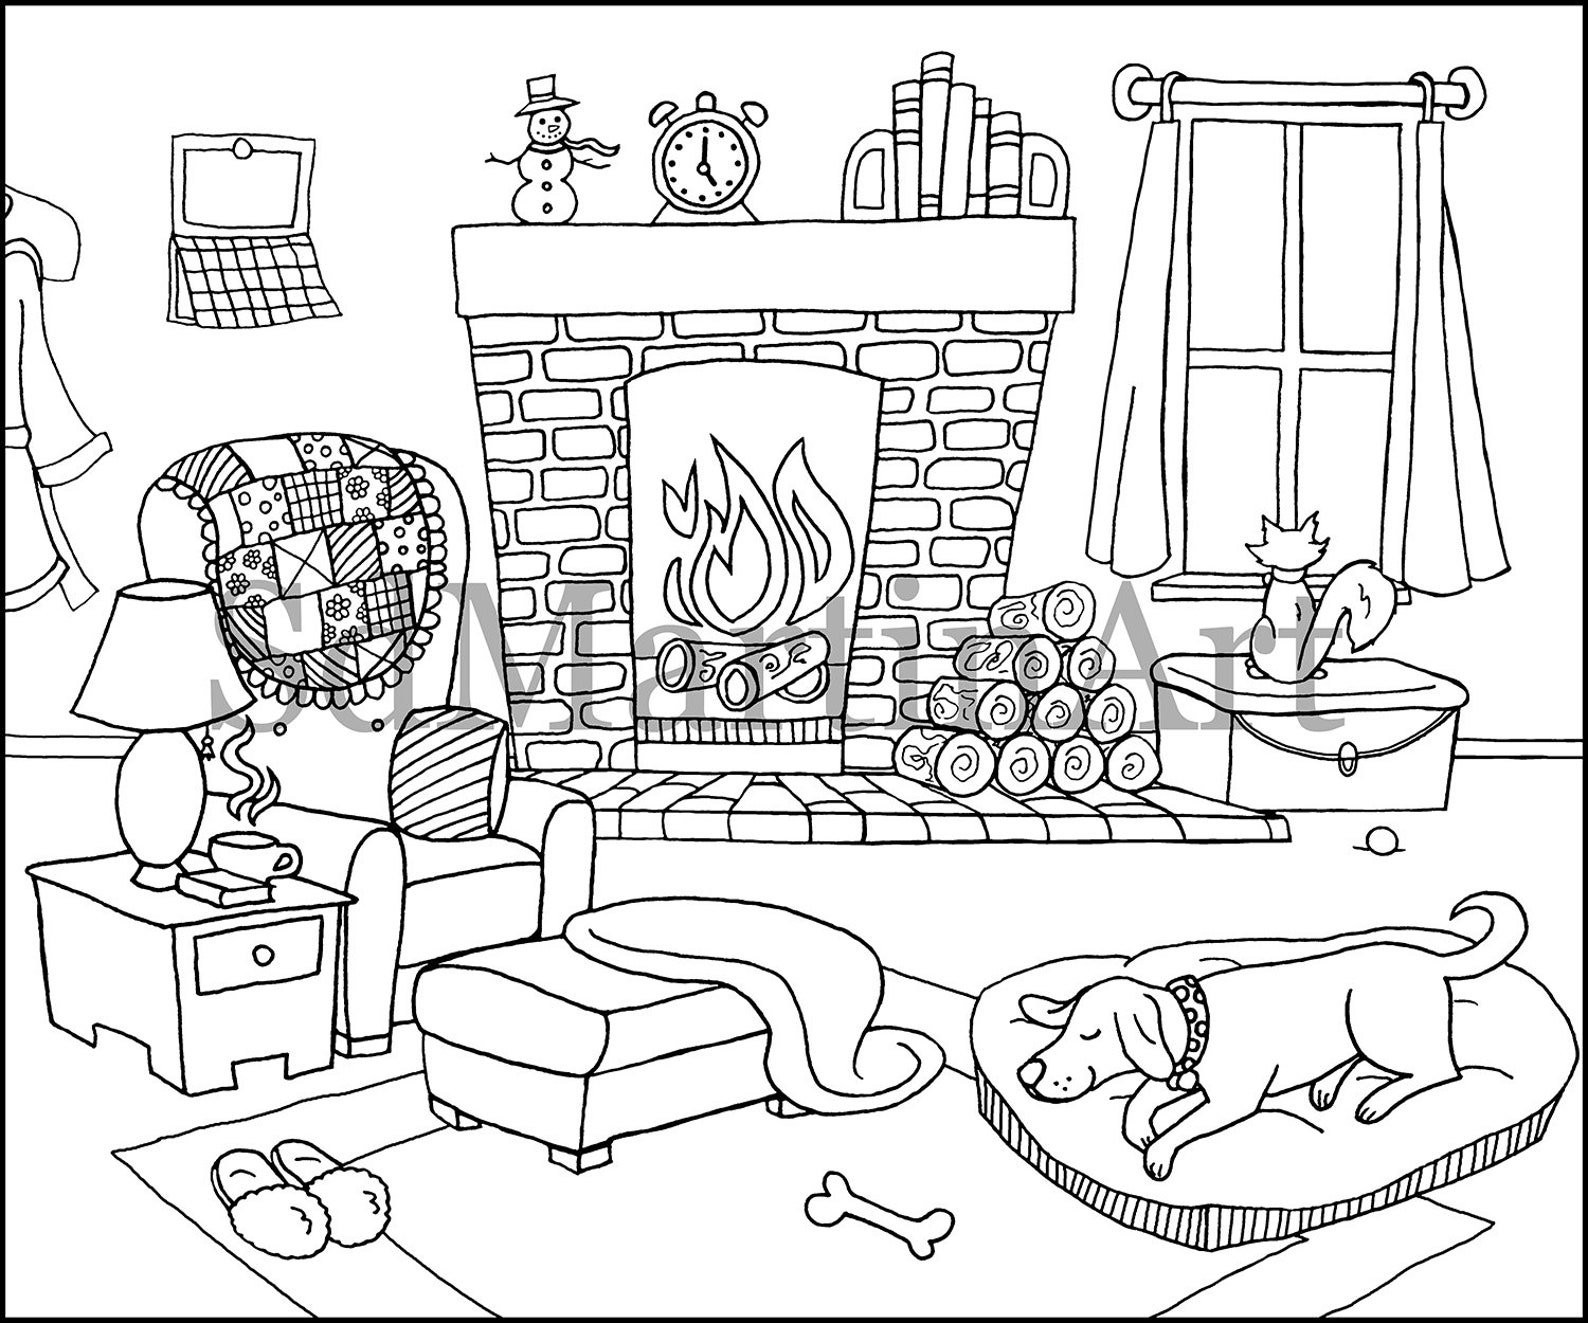 38-best-ideas-for-coloring-coloring-page-of-a-fireplace